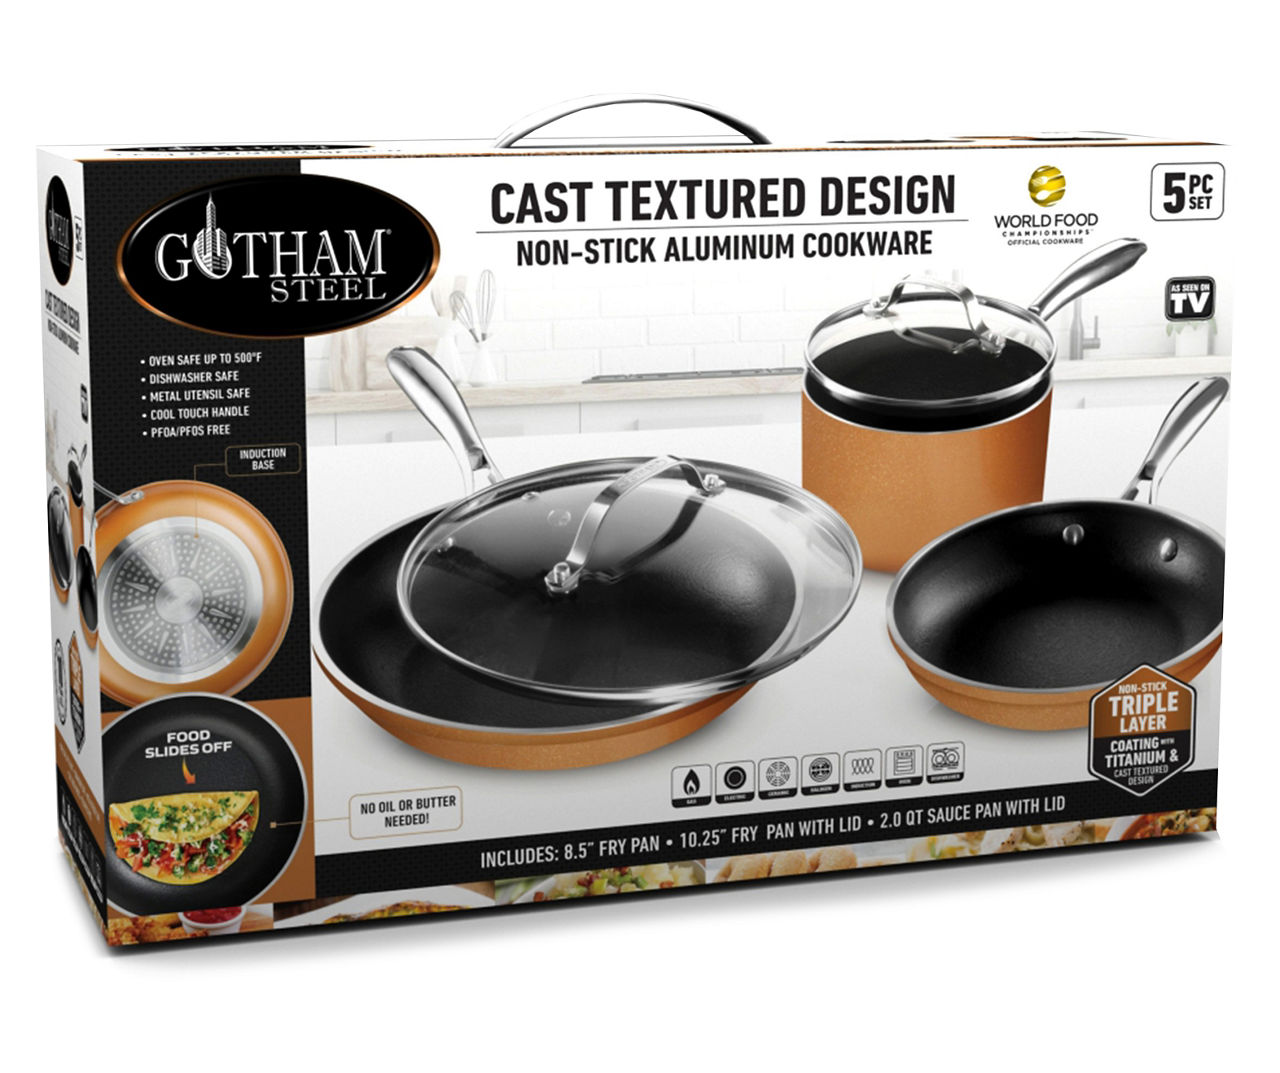 Gotham Steel 3-Qt. Non-stick Saucepan with Glass Lid - As Seen On TV! -  California Shop Small